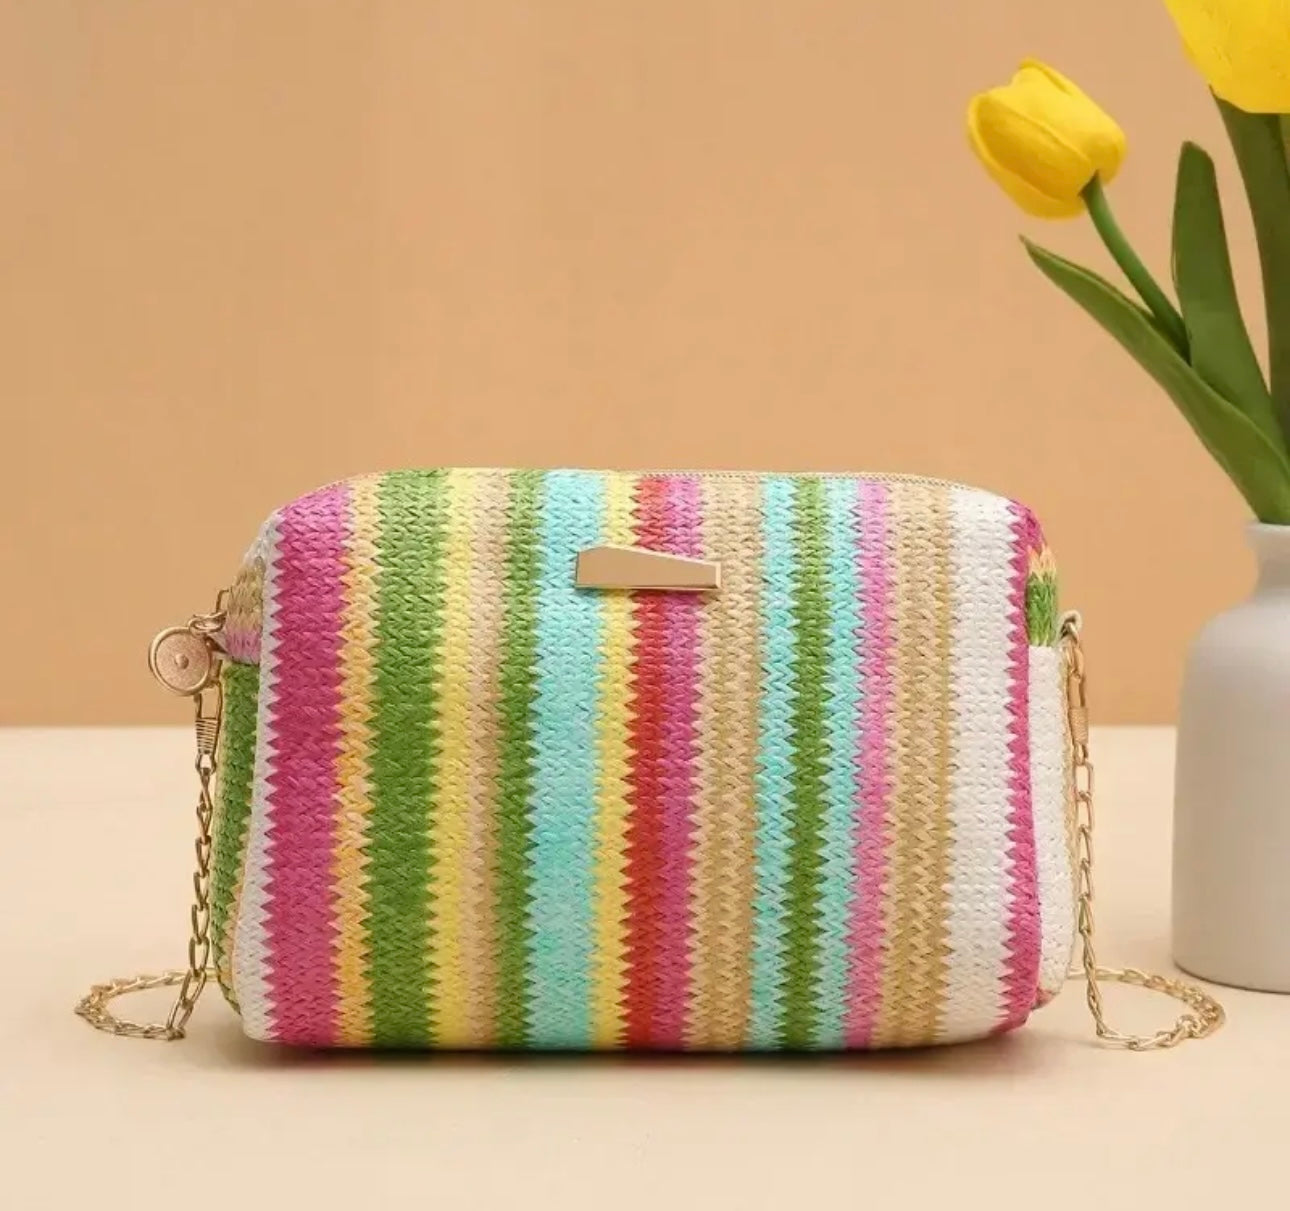 The Knitted Handbag (Comes In Other Colors